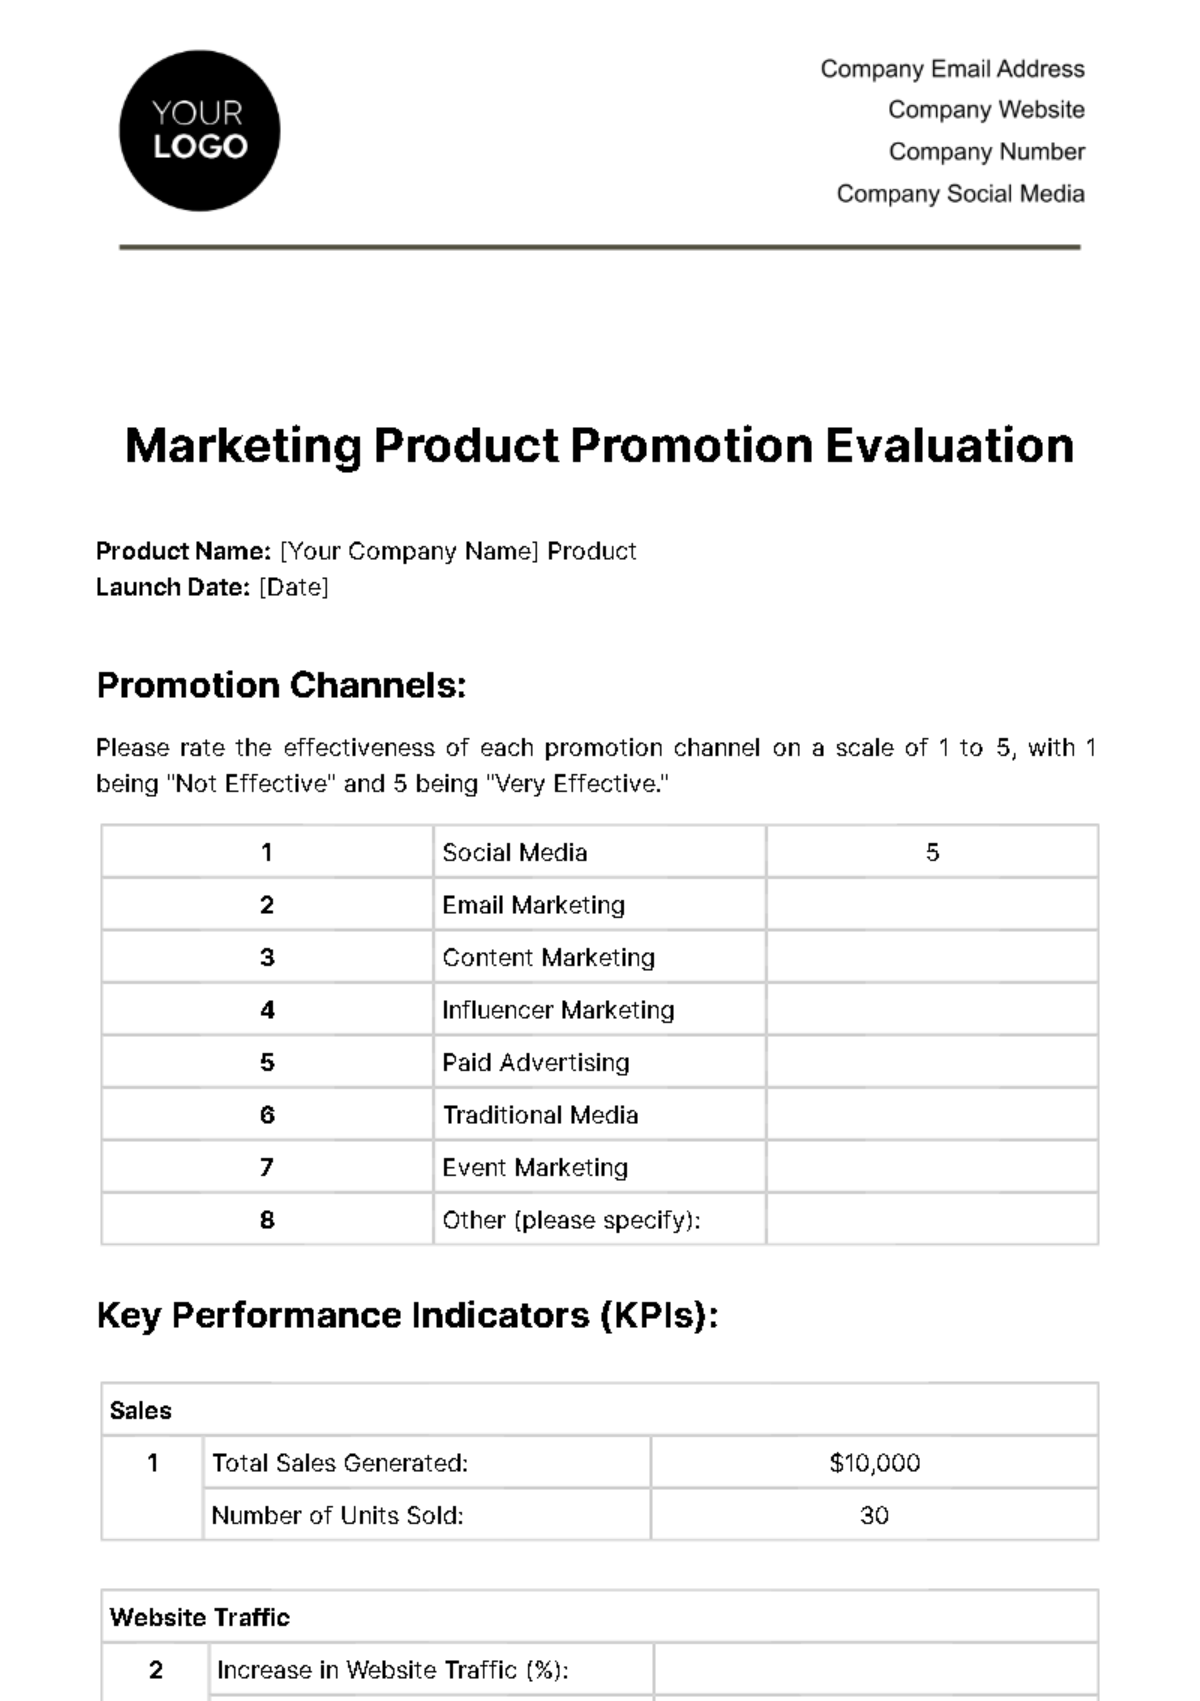 Marketing Product Promotion Evaluation Template